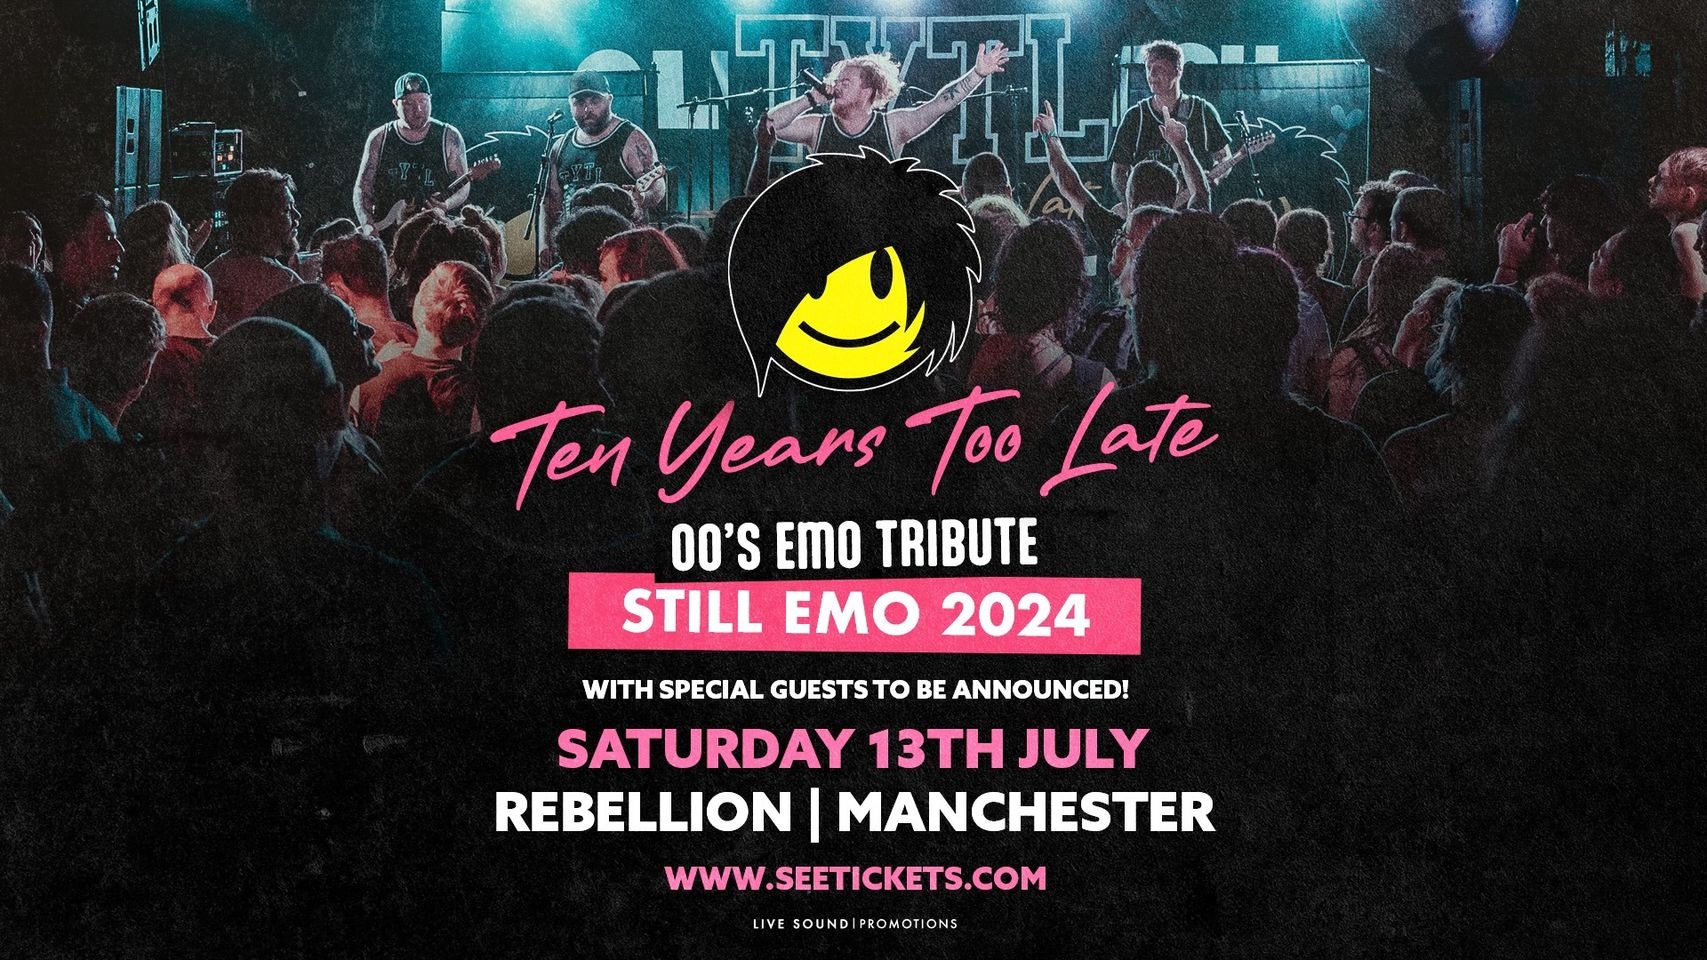 Ten Years Too Late (00’s Emo Tribute) – Manchester Rebellion